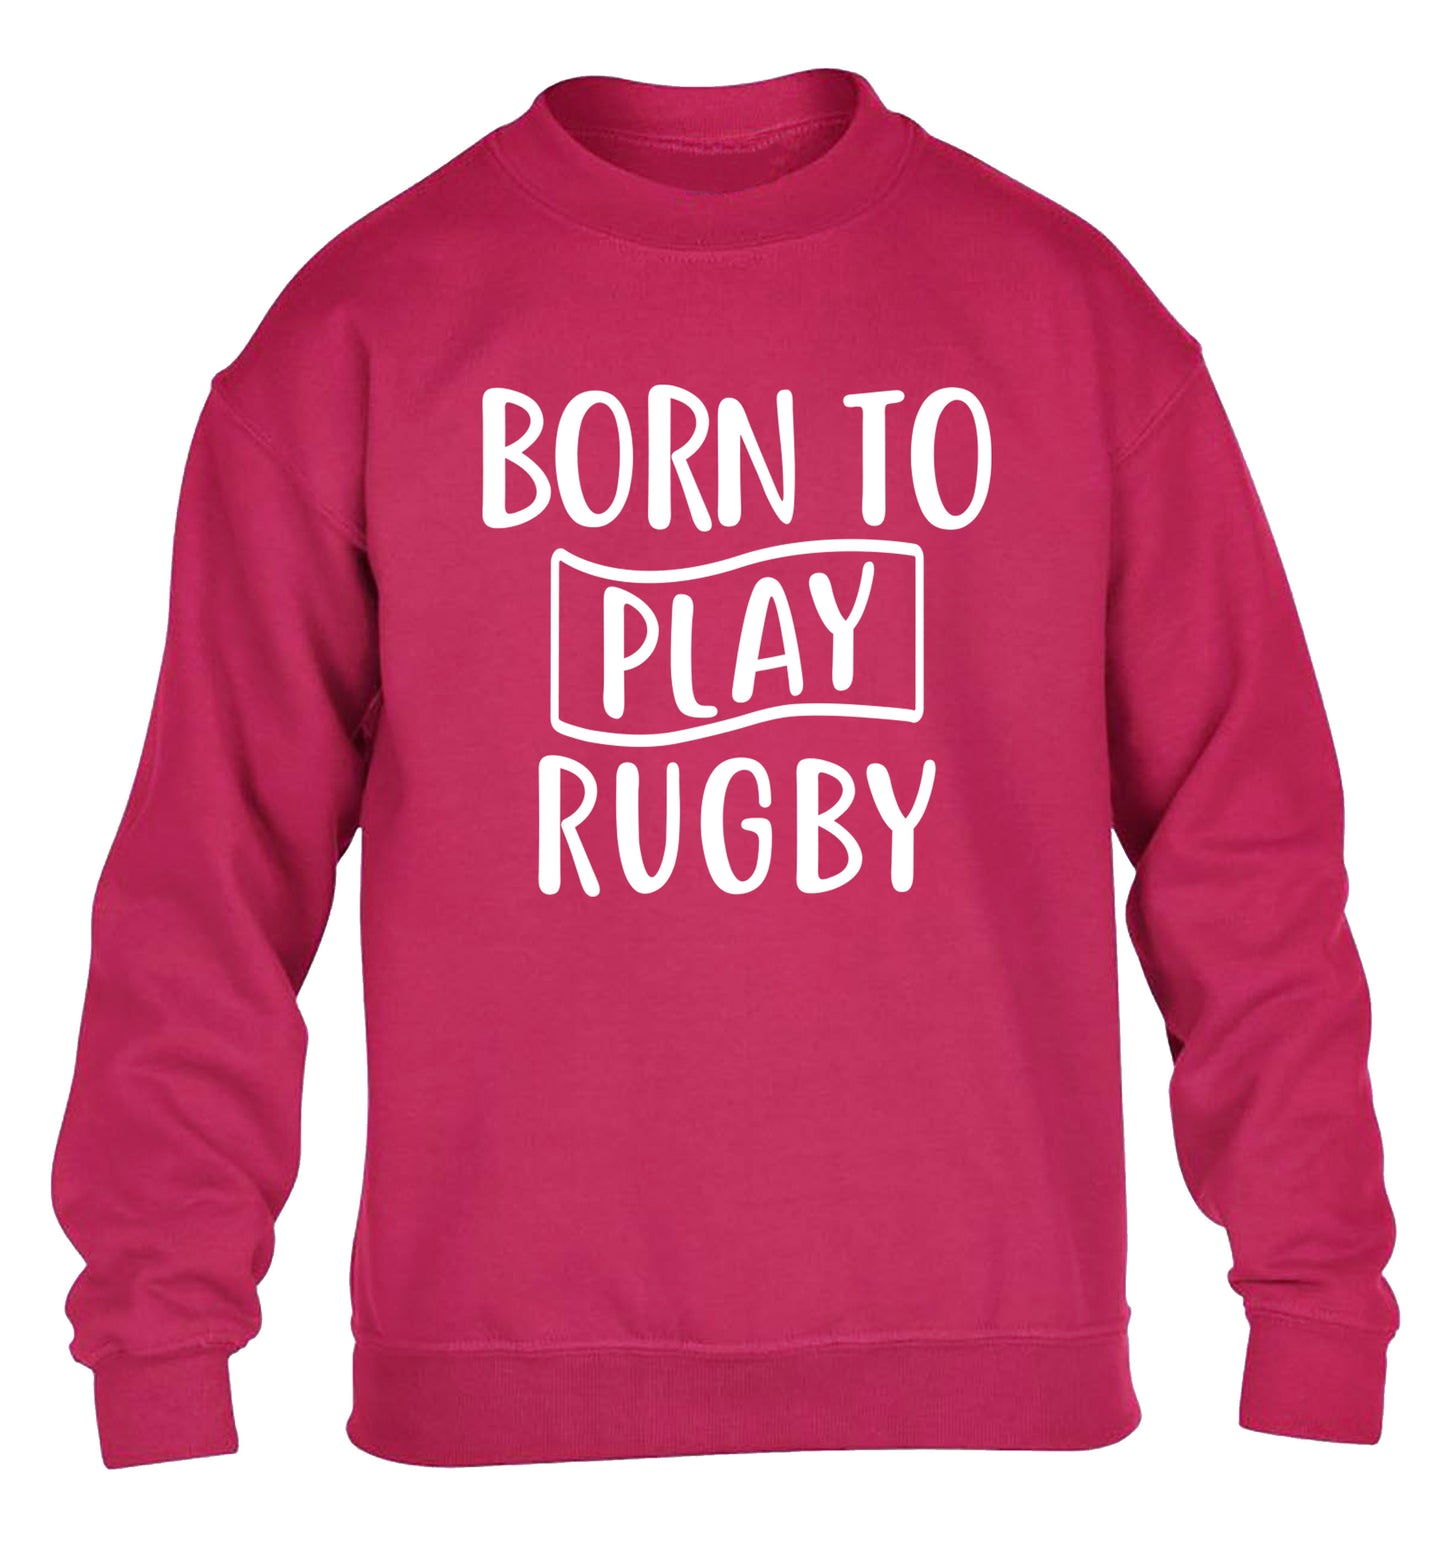 Born to play rugby children's pink sweater 12-13 Years